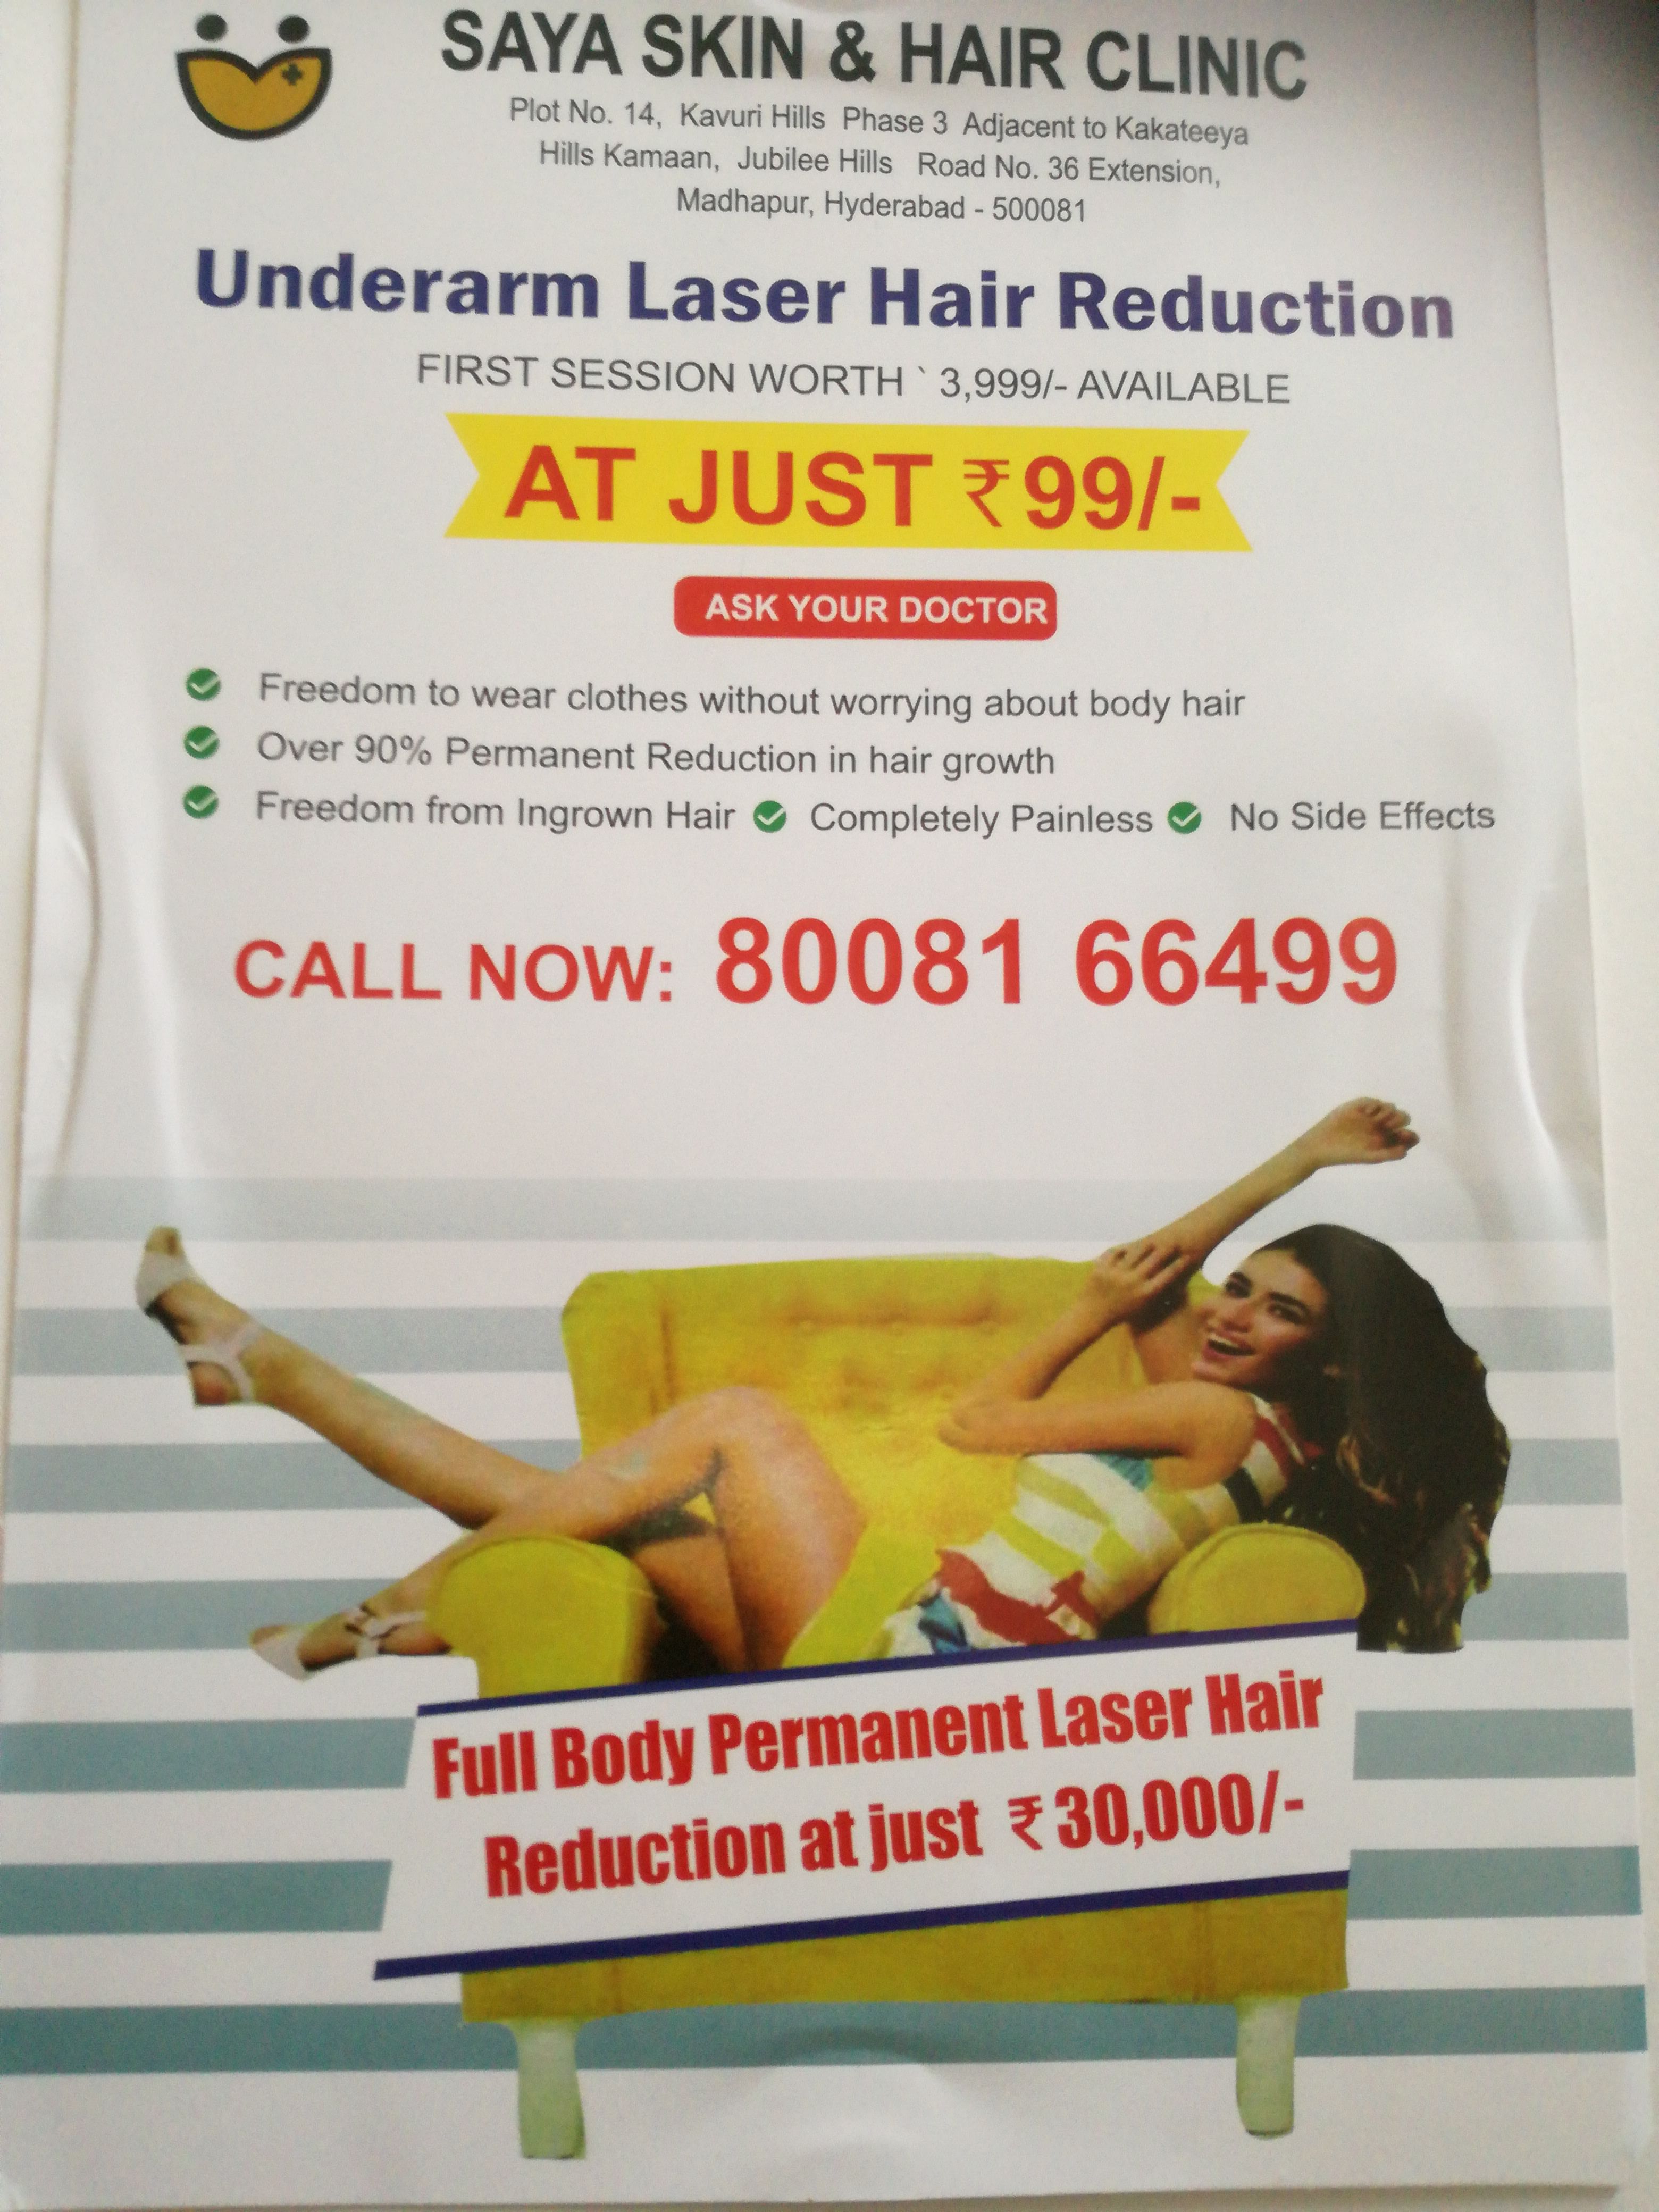 Full Body Permanent Laser Hair Reduction at Rs. 30000 only